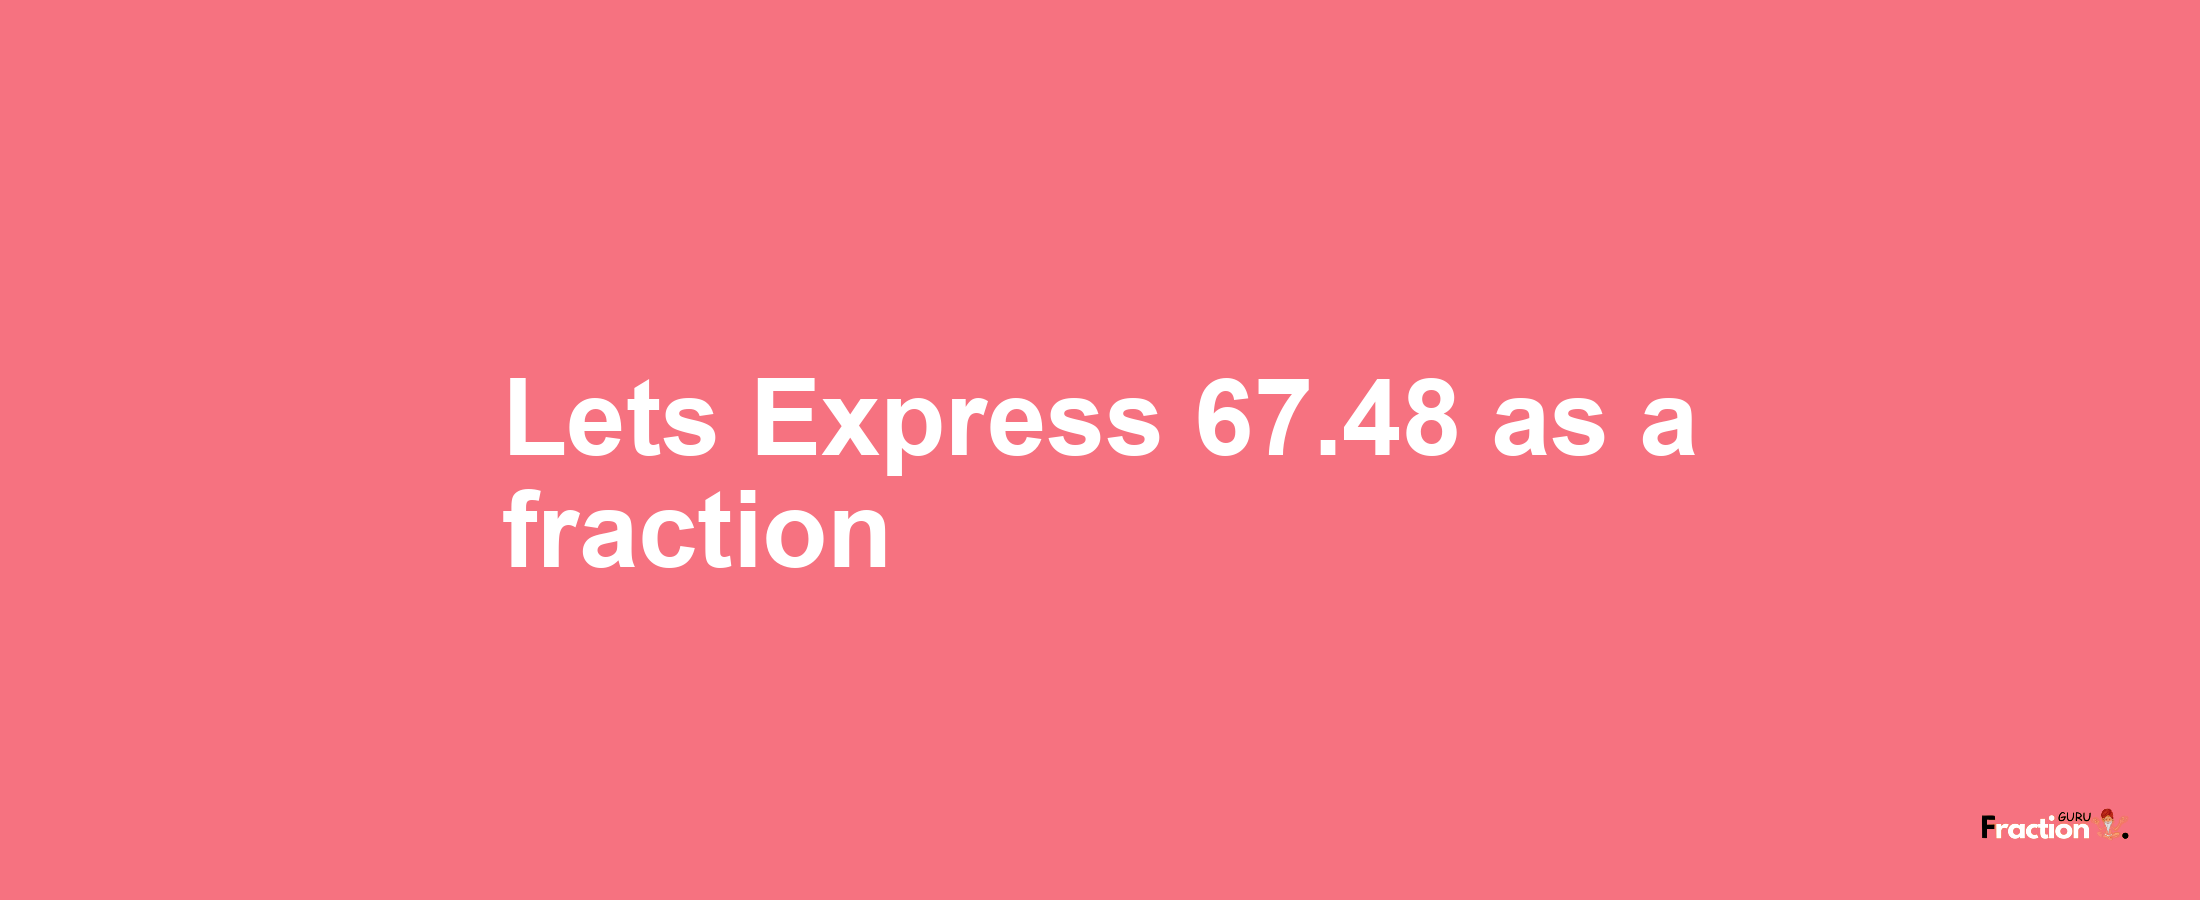 Lets Express 67.48 as afraction